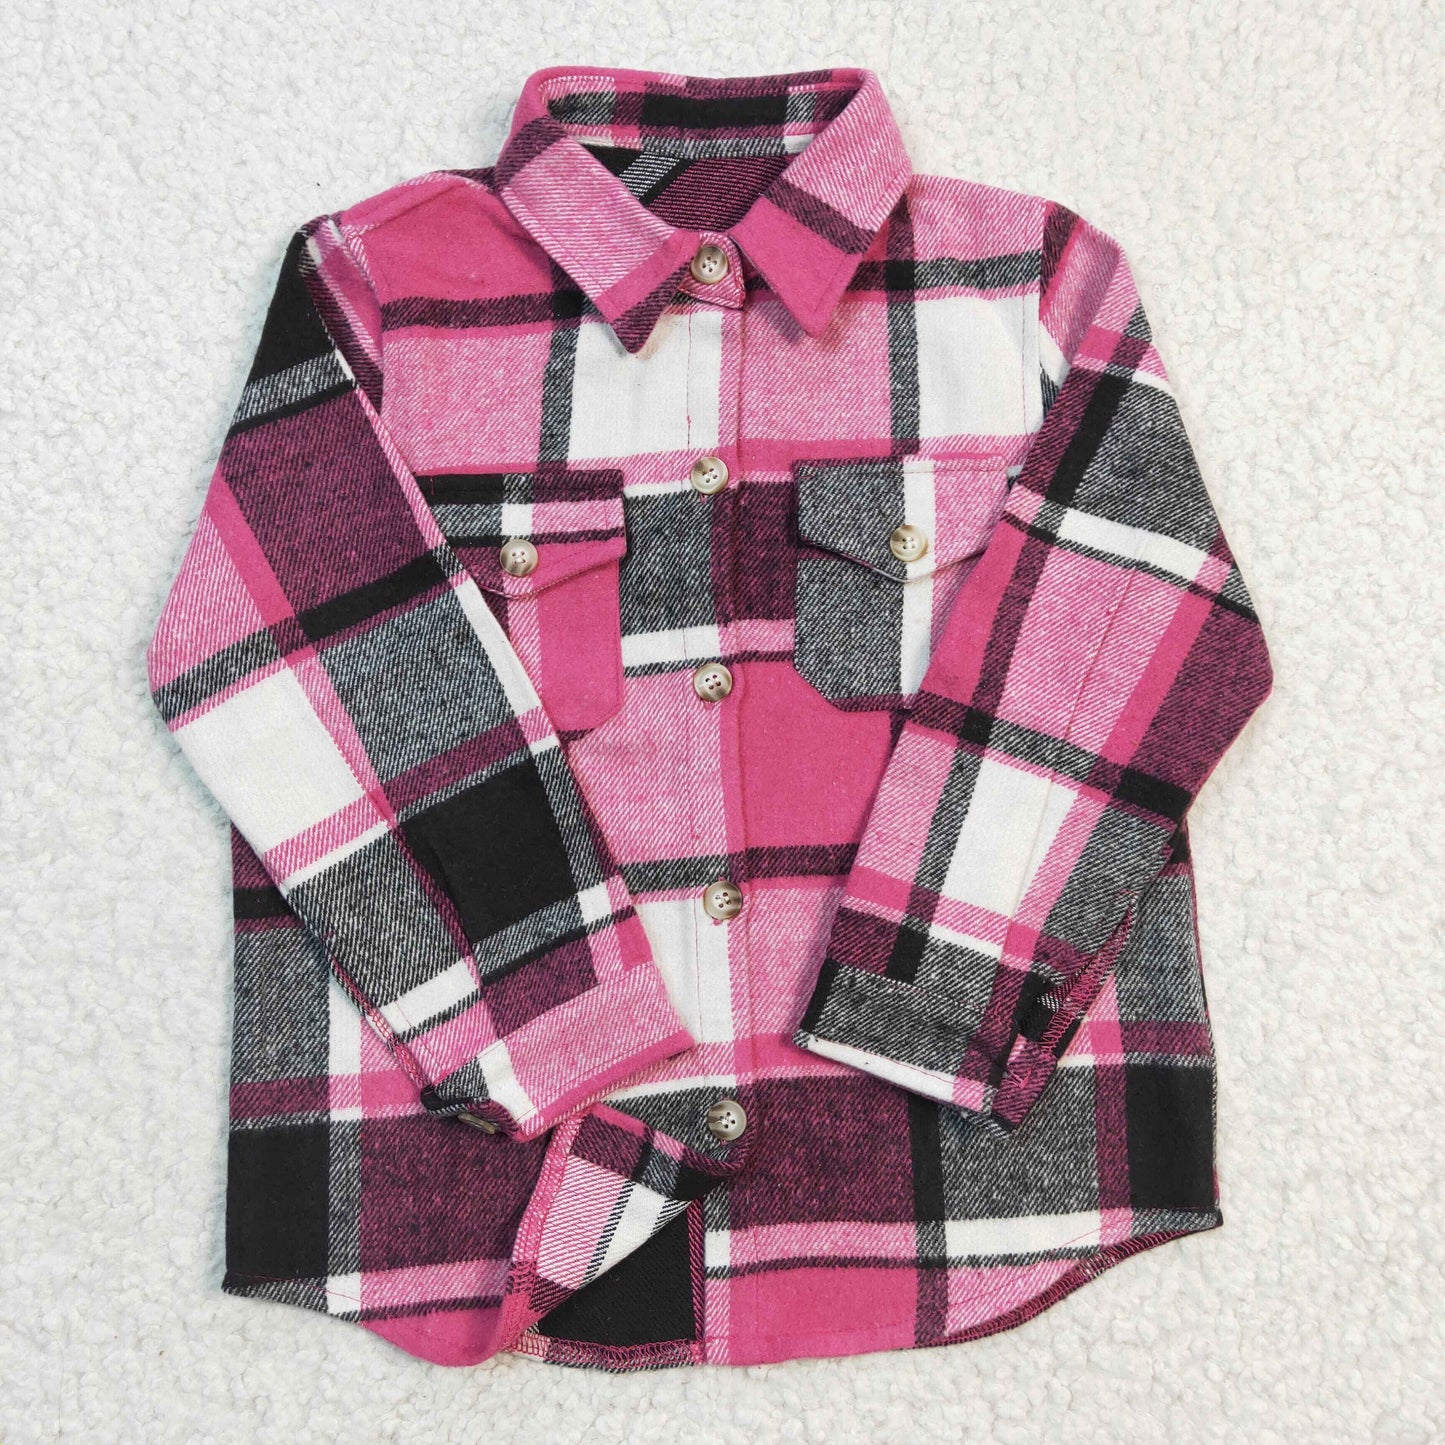 flannel hot pink gray cotton plaid button winter top clothing